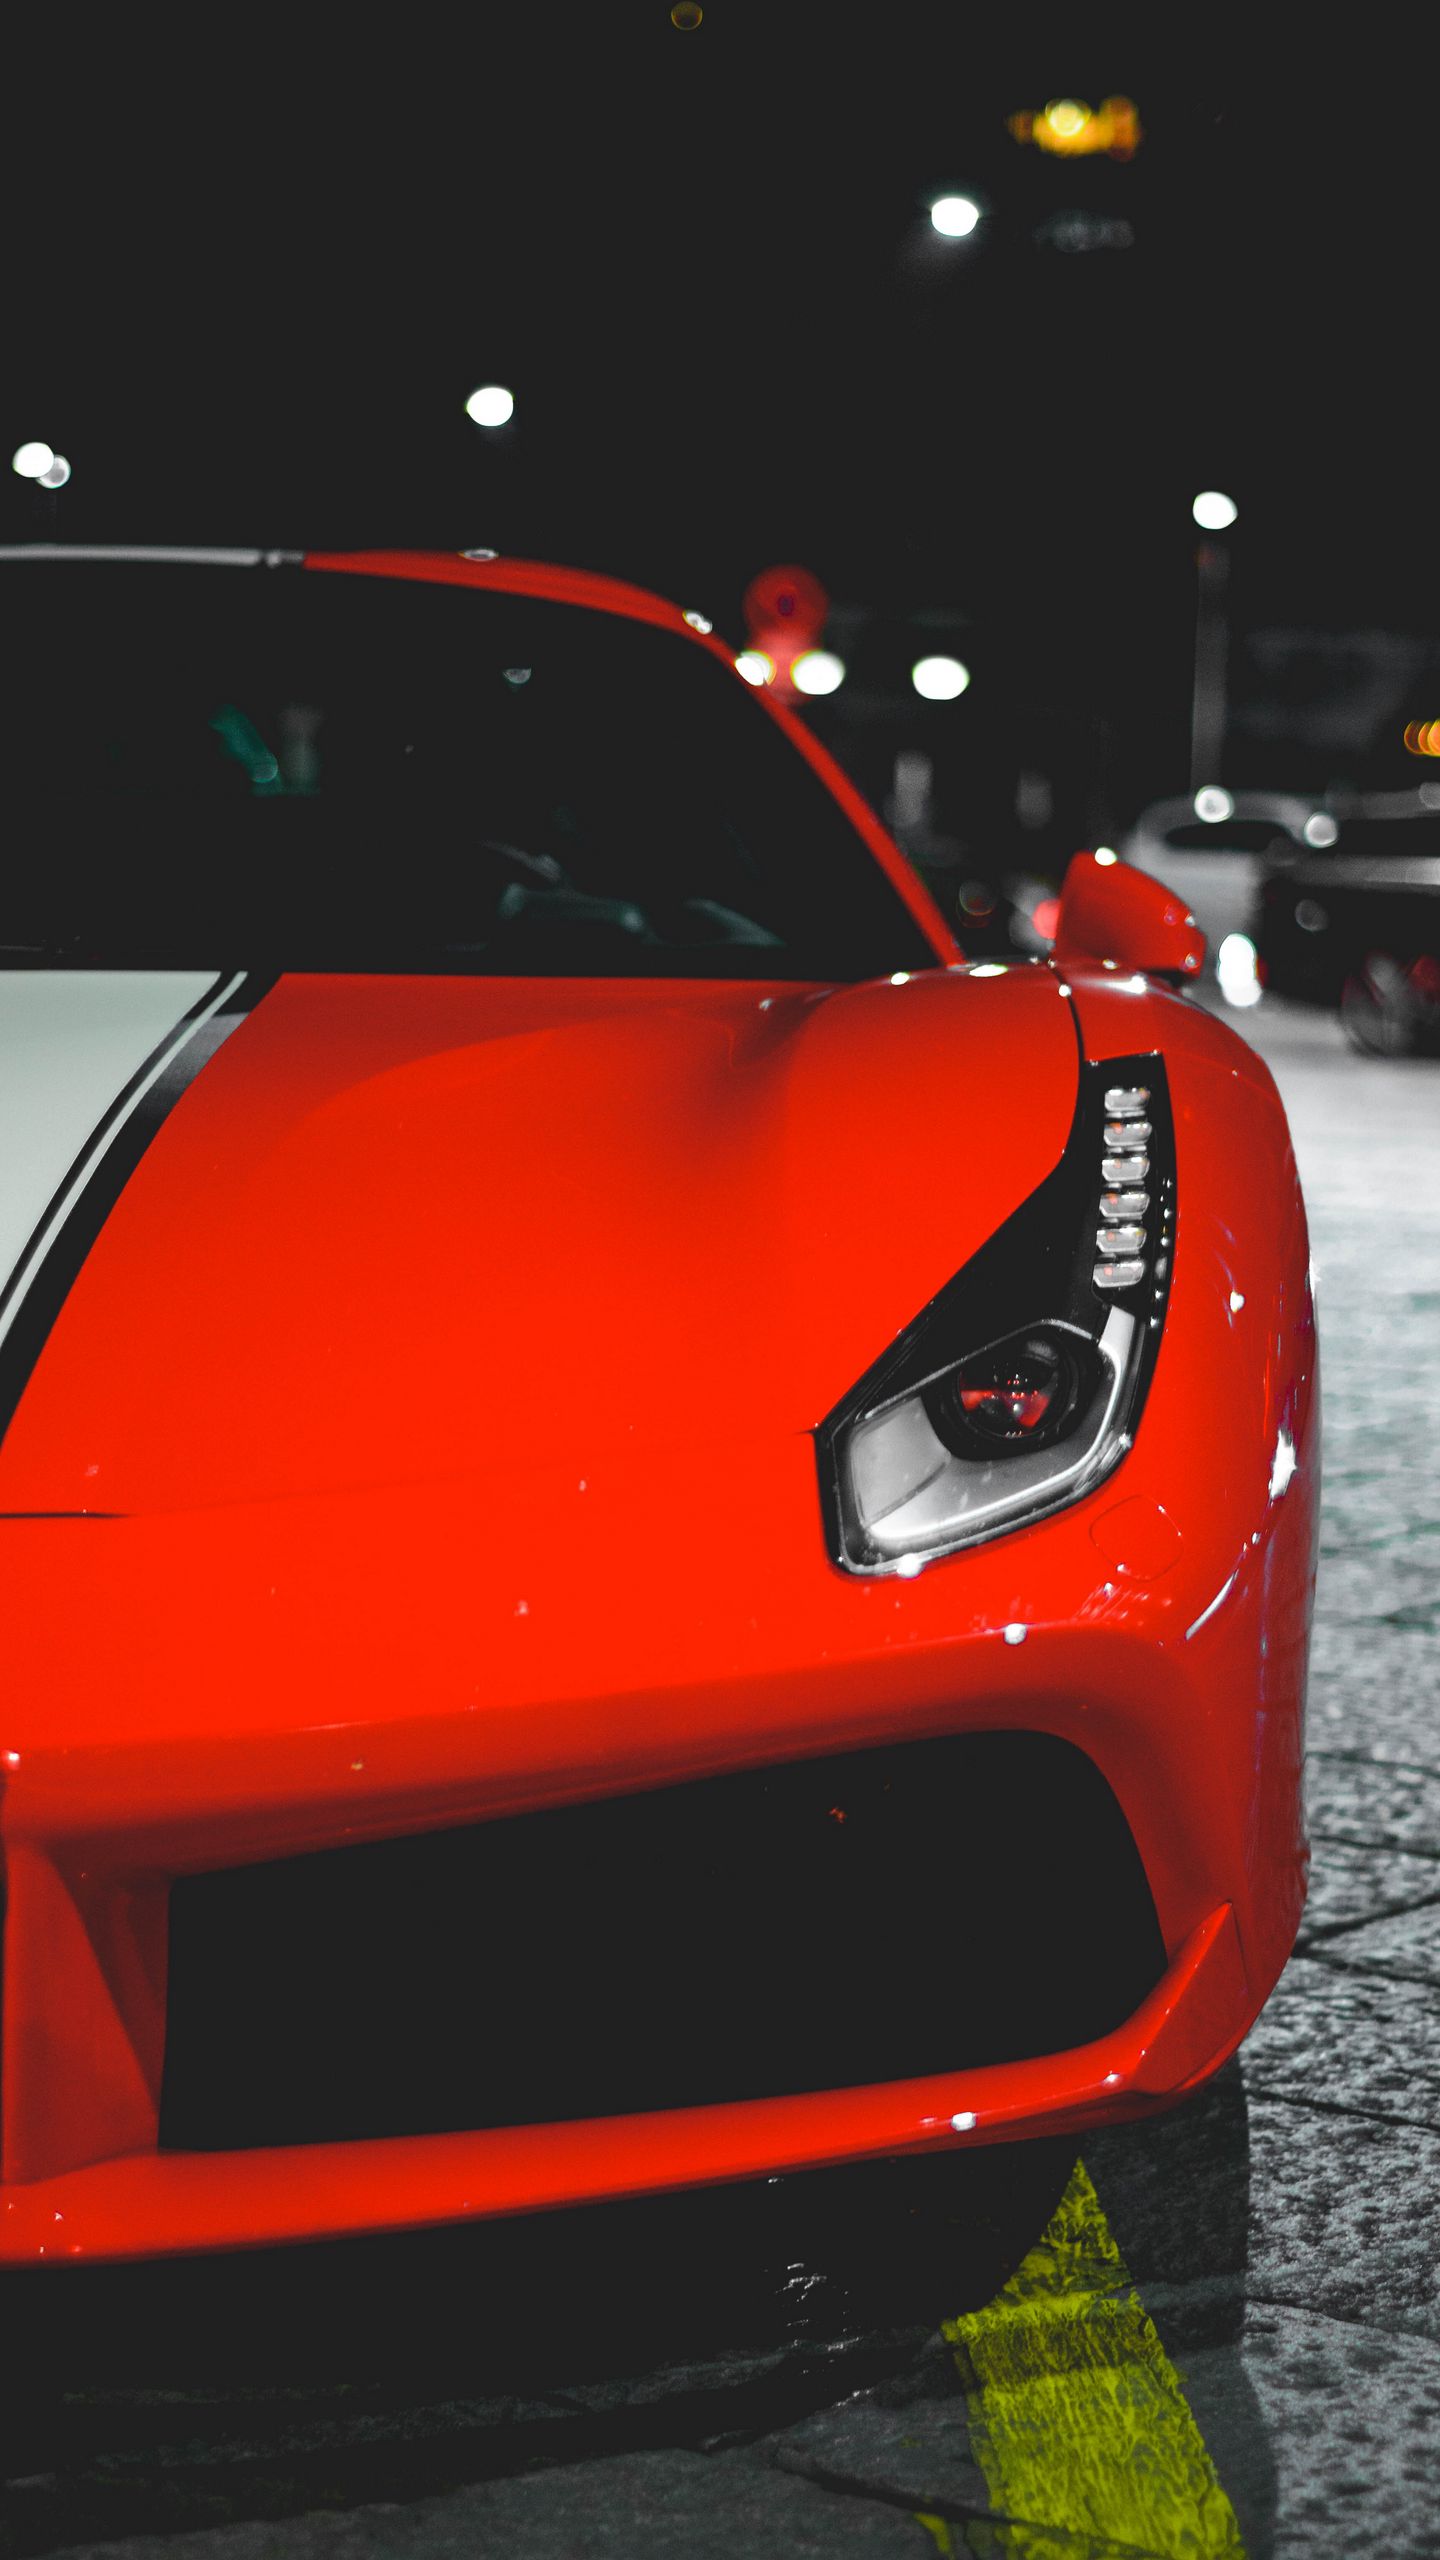 Download wallpaper 1440x2560 auto, front view, red, sport car qhd samsung  galaxy s6, s7, edge, note, lg g4 hd background